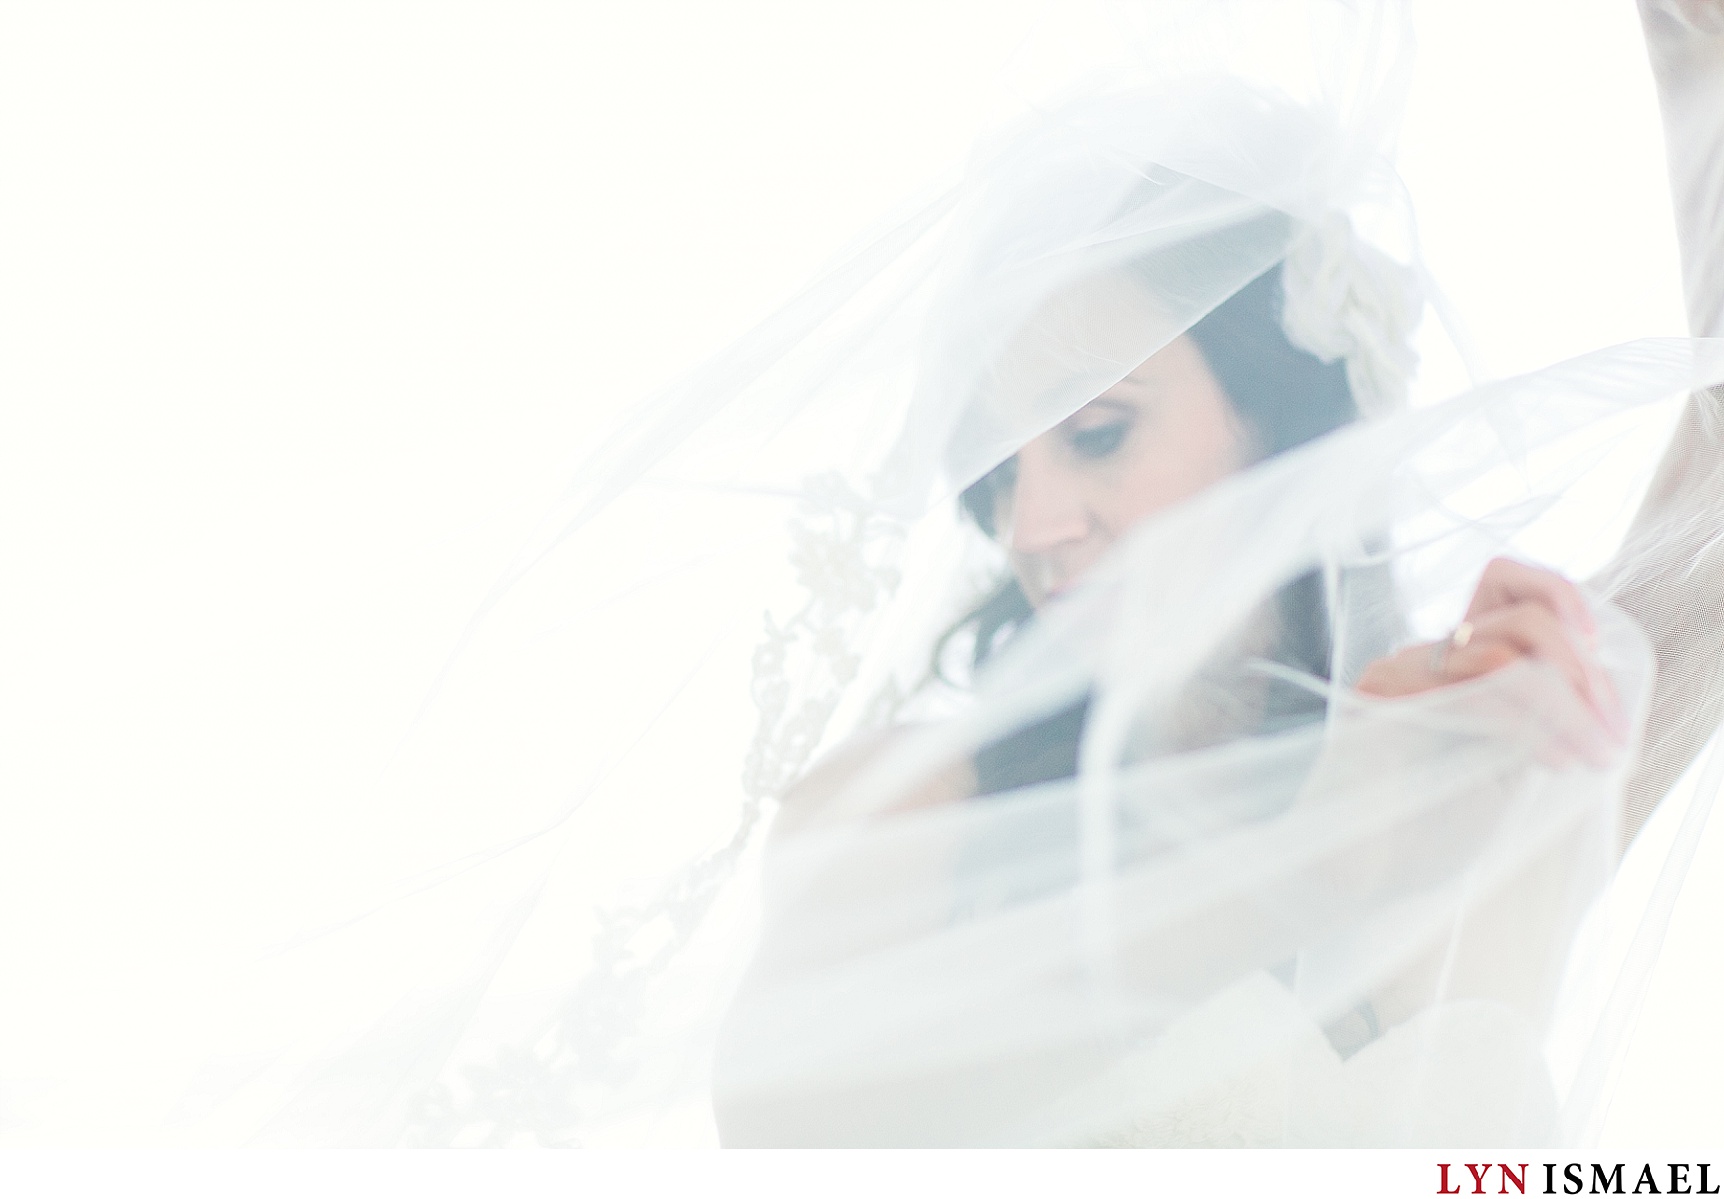 An artistic portrait of the bride using her veil.